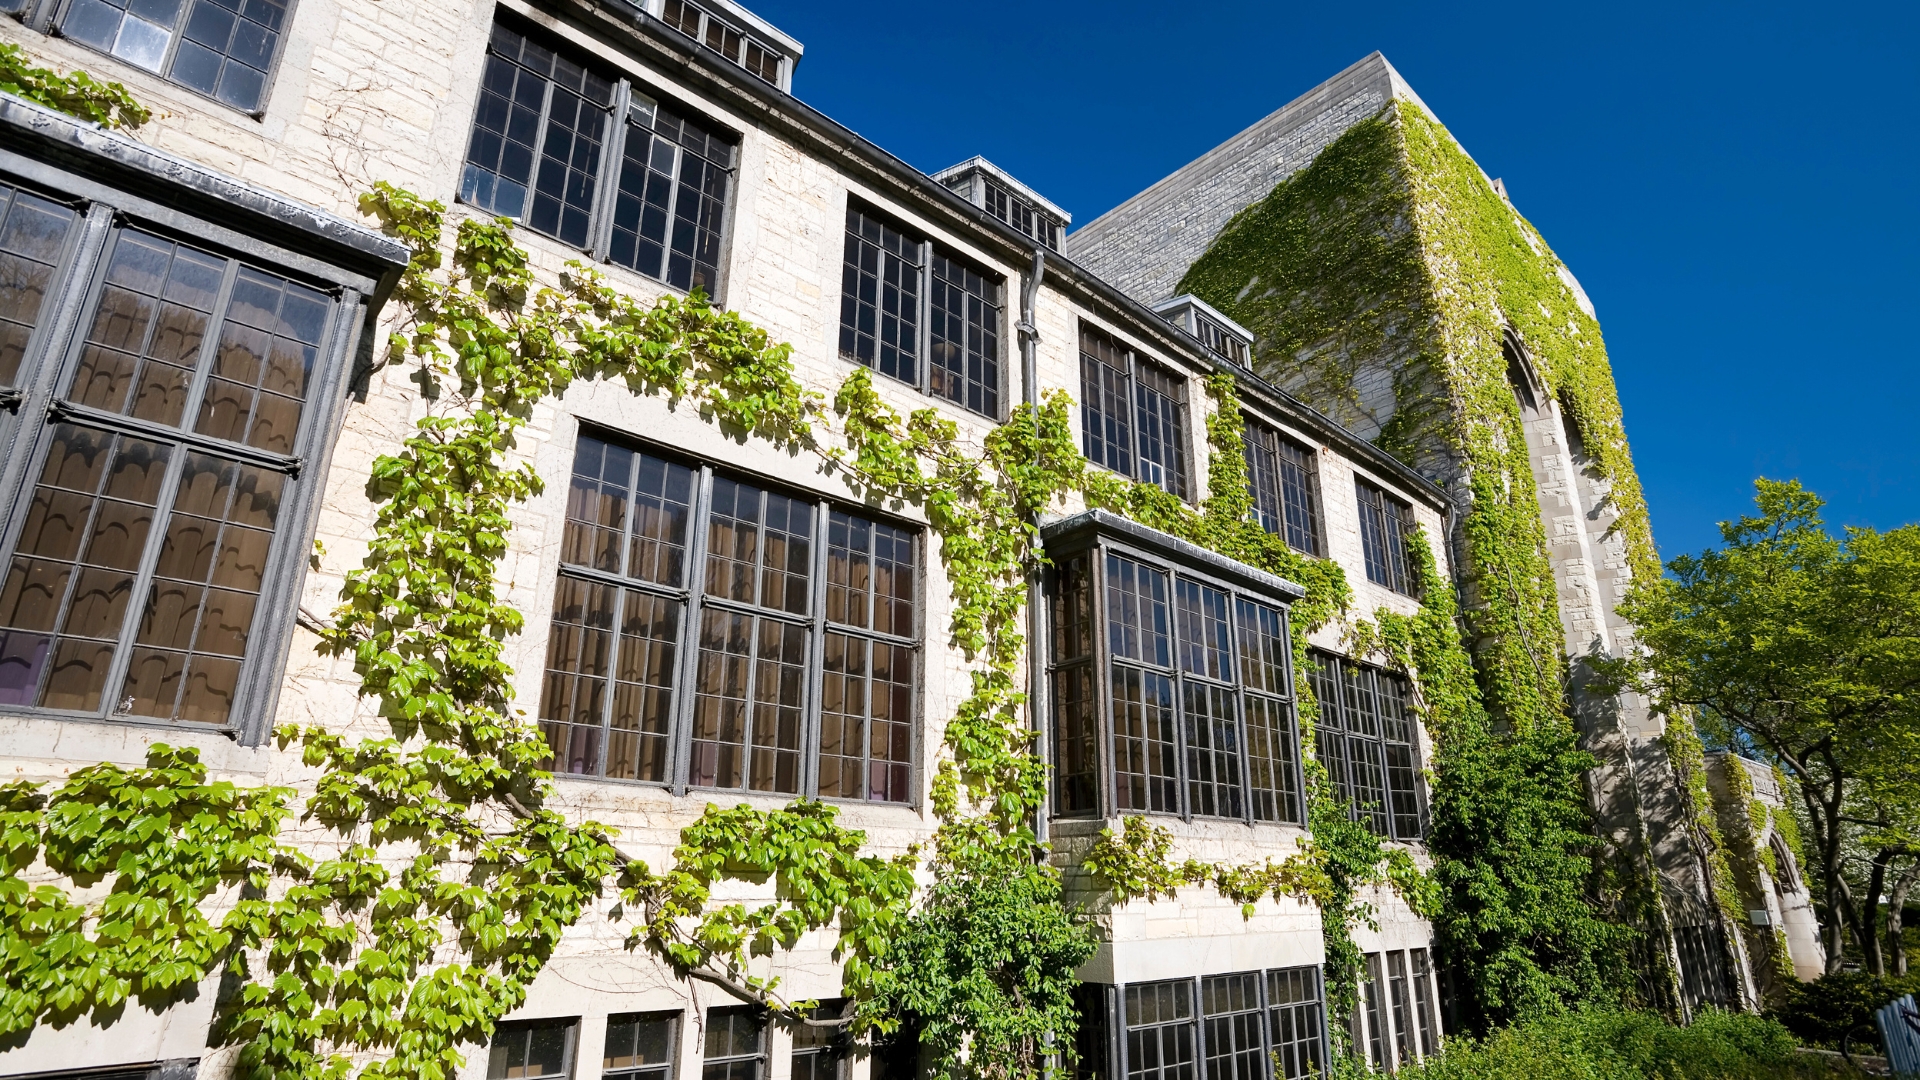 A photo of an ivy-covered Northwestern University building